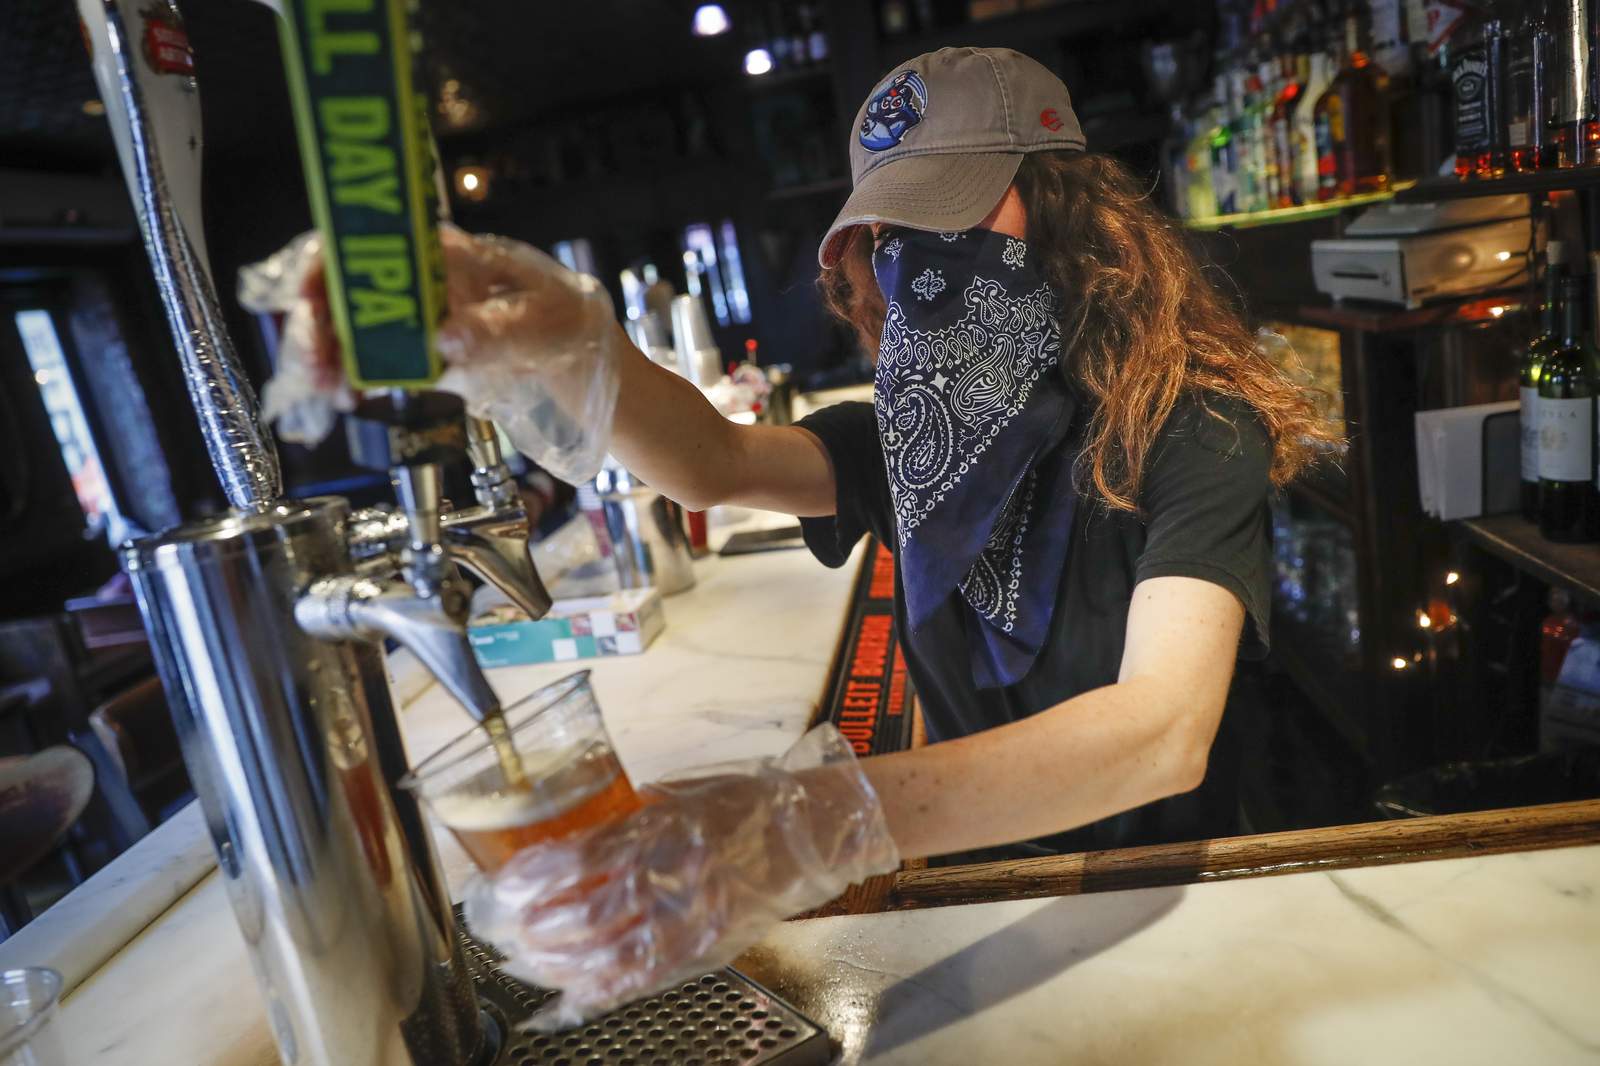 Completely blindsided: Bar industry workers share their experience after second reclosing of Texas bars